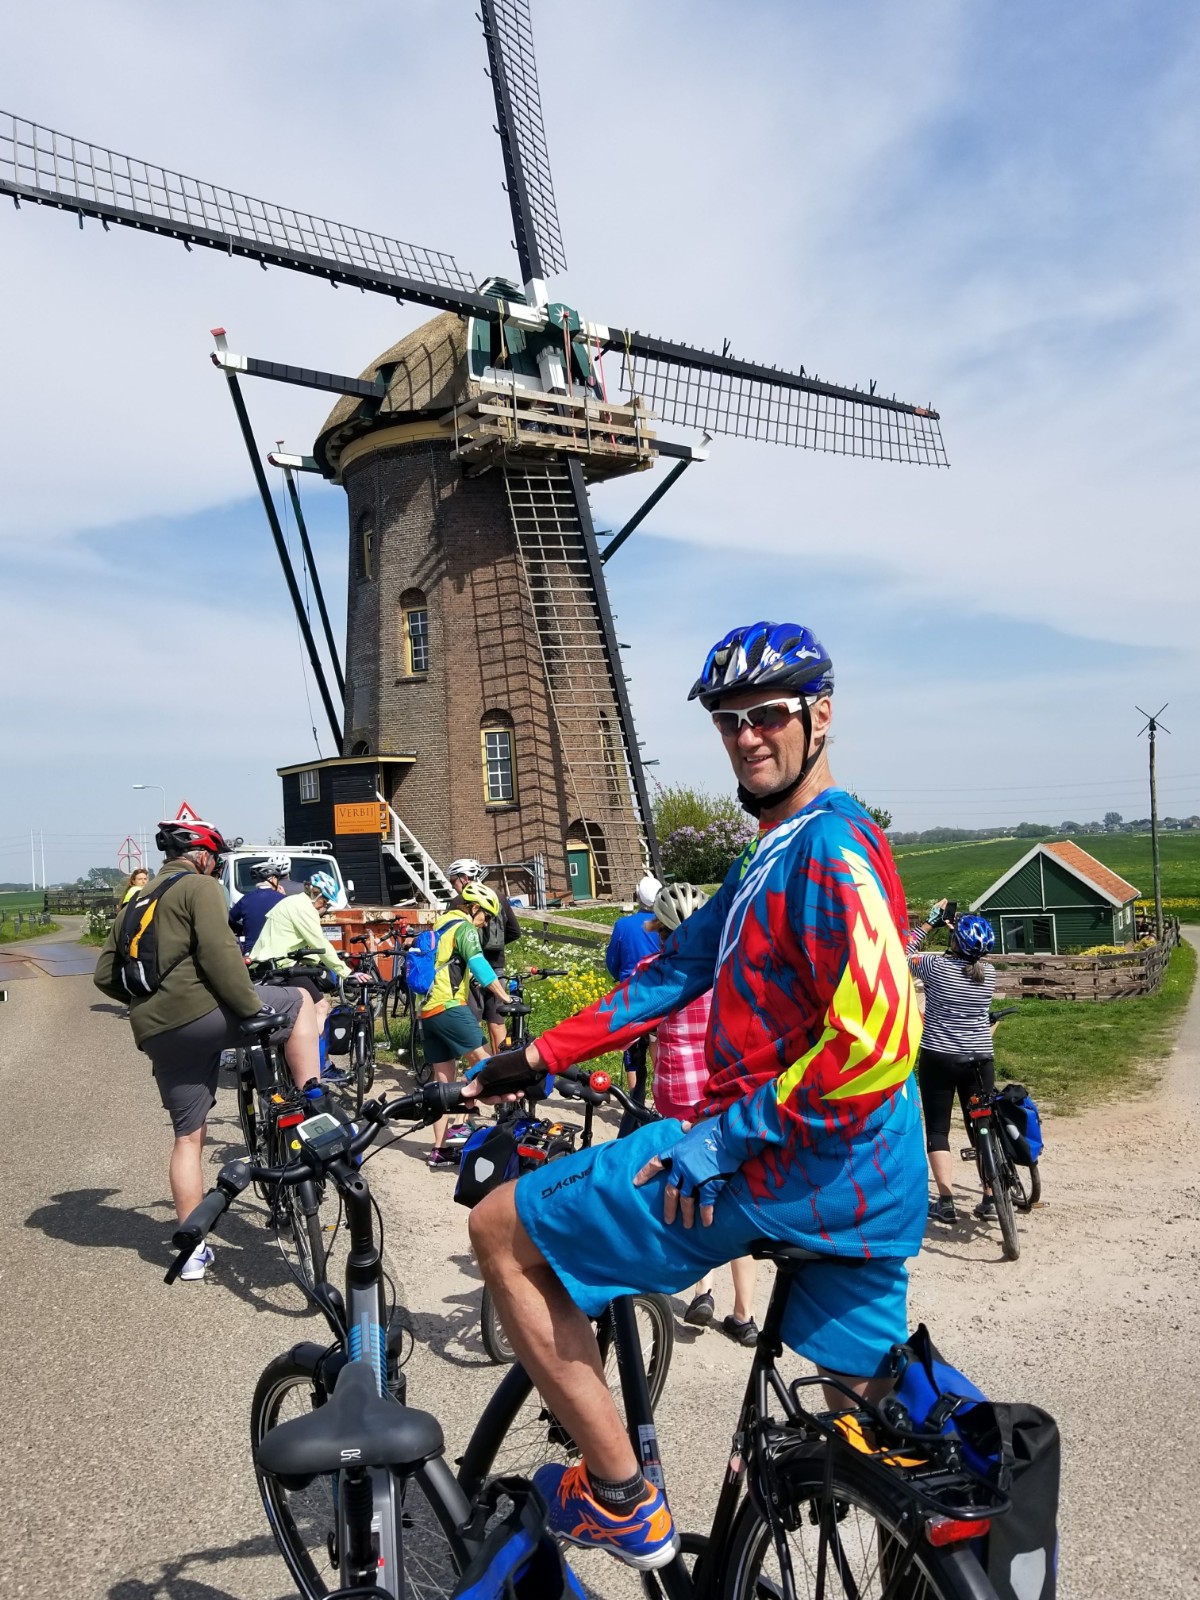 Posing in front of a windmill on our bike tour!